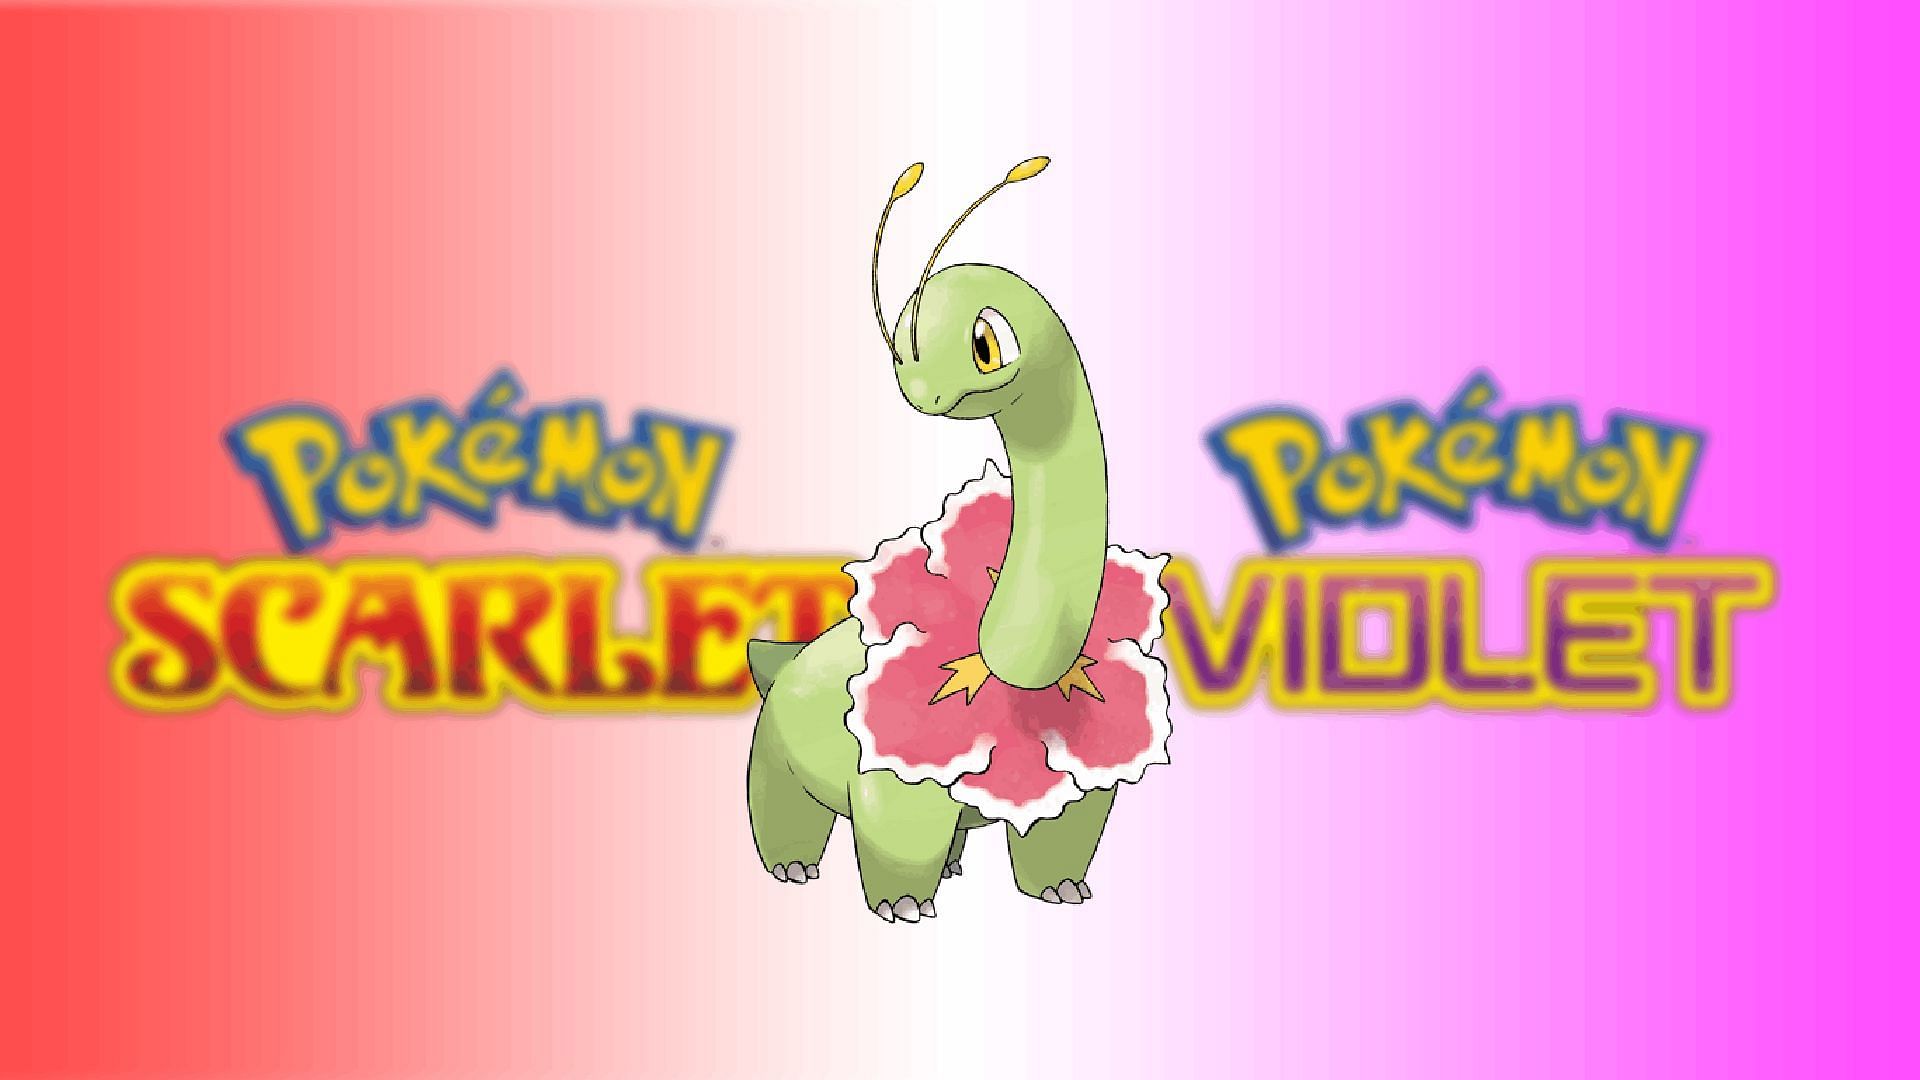 Pokemon Scarlet and Violet Psychic Meganium 7-star Tera Raid: All moves, counters, and more (Image via TPC